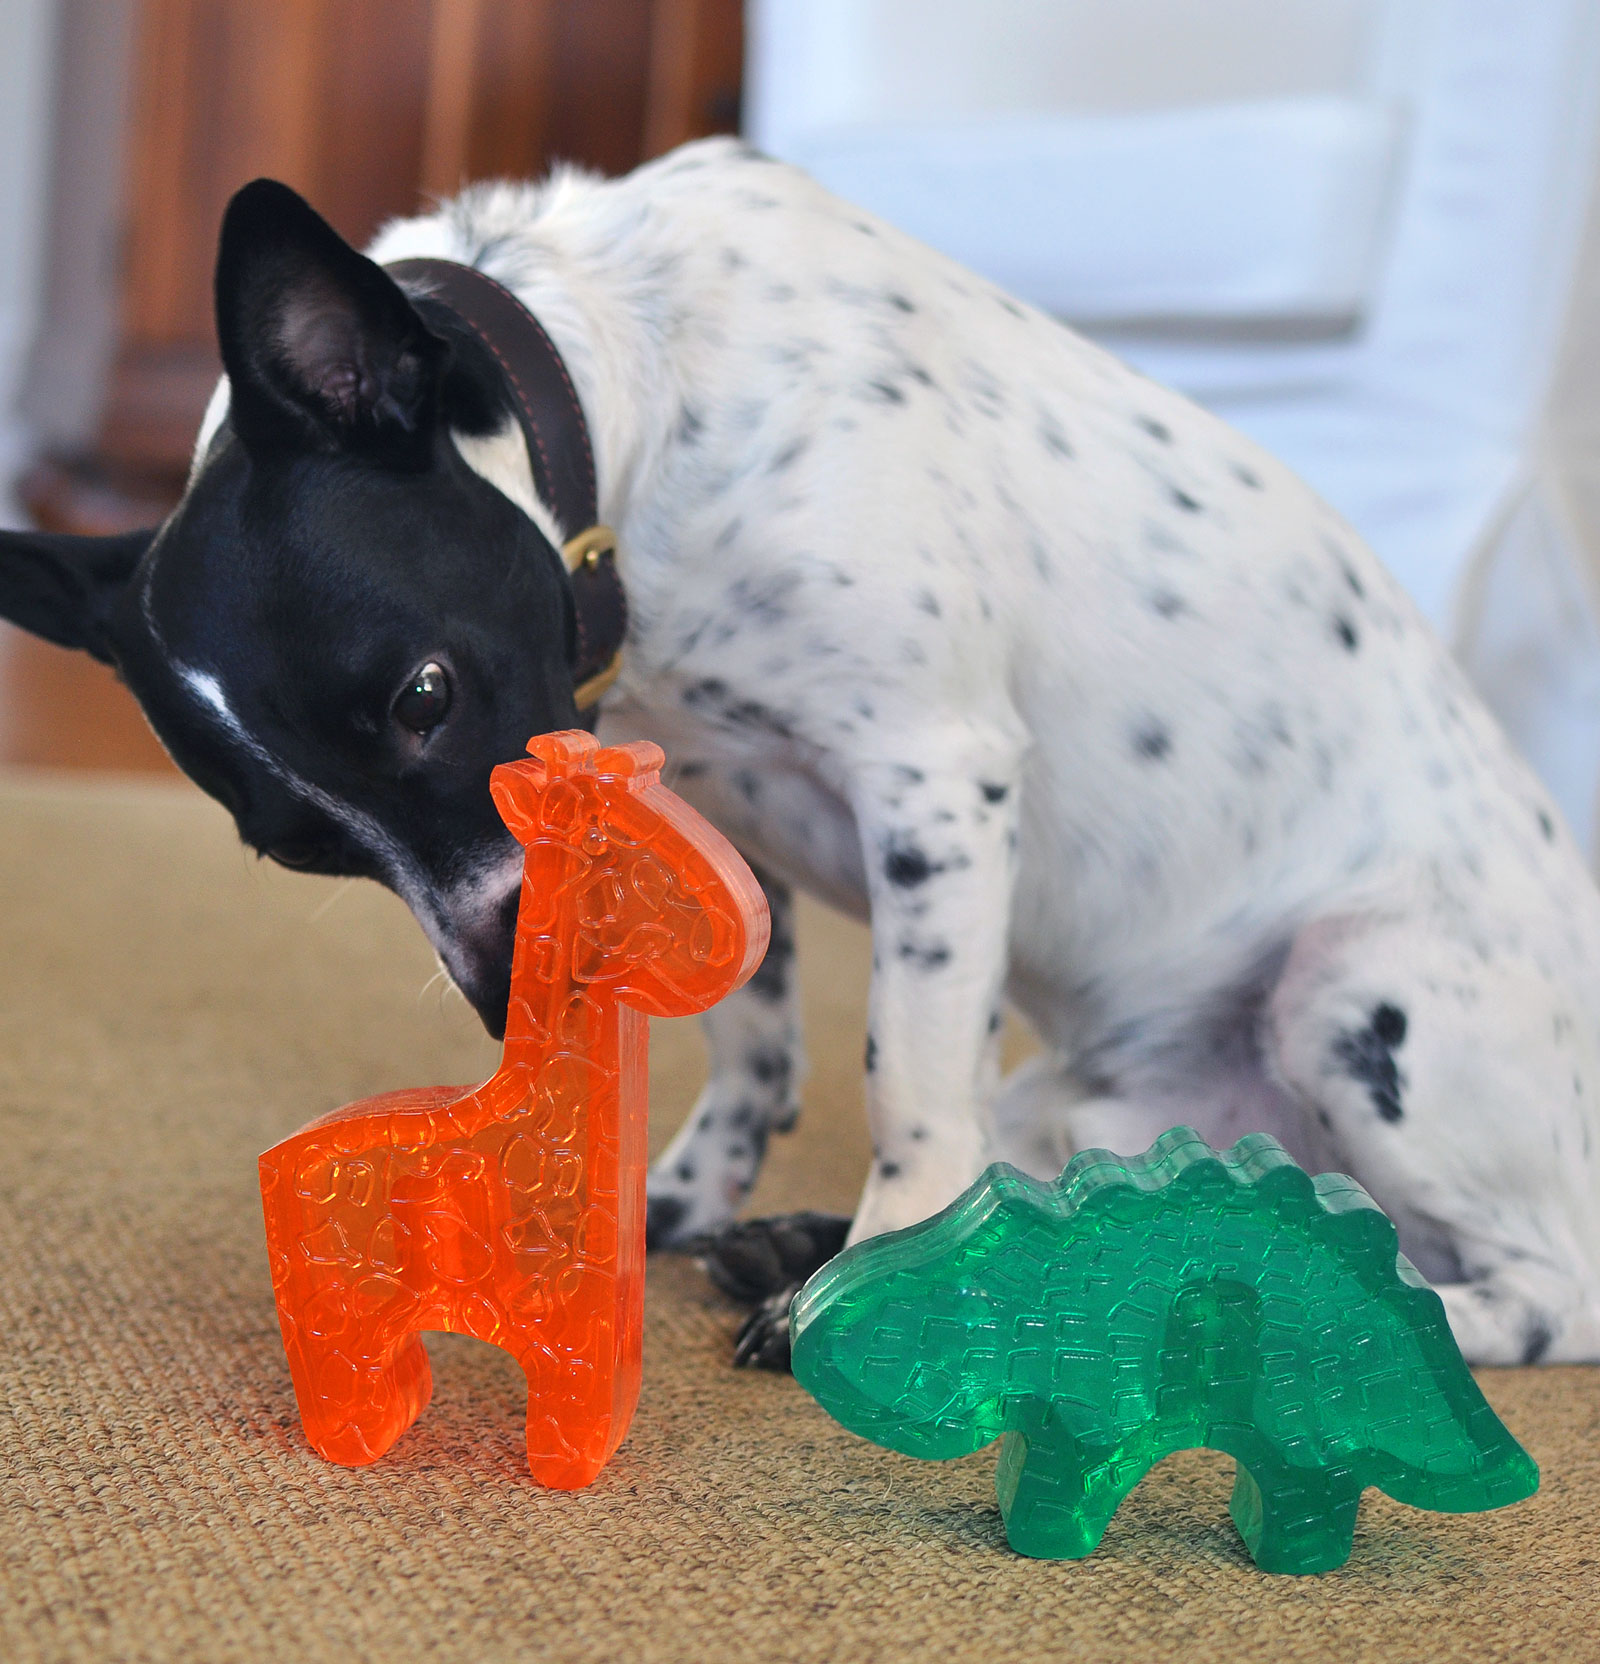 The new Kong Squeezz Zoo line is an adorable and colorful addition to Kong's line of incredible toys!